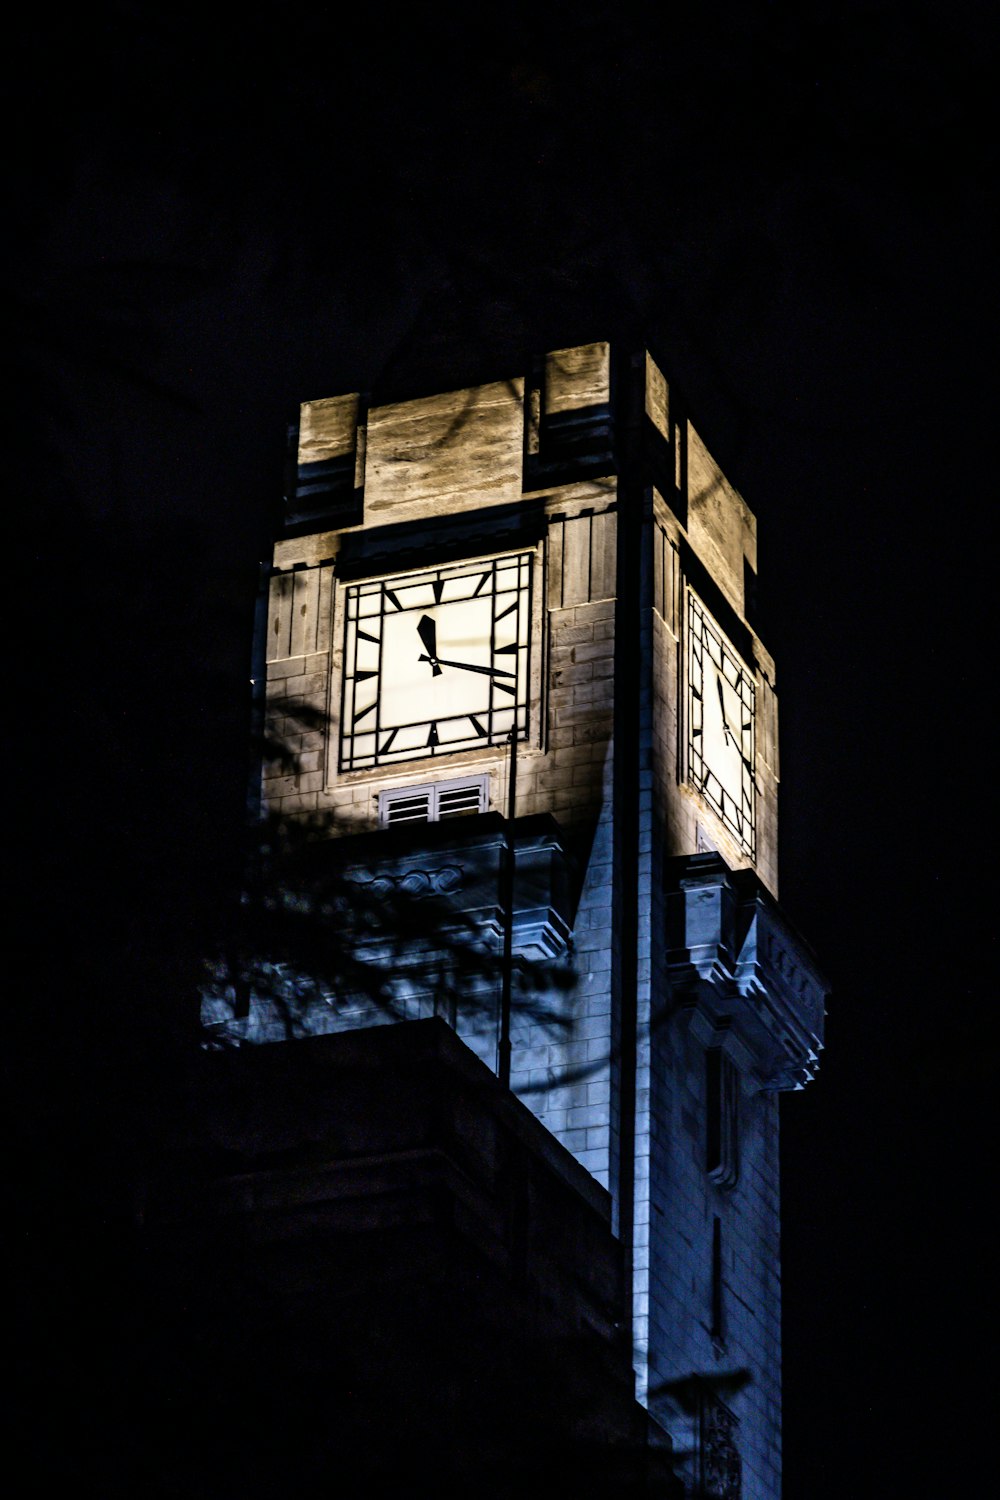 a large clock tower lit up at night